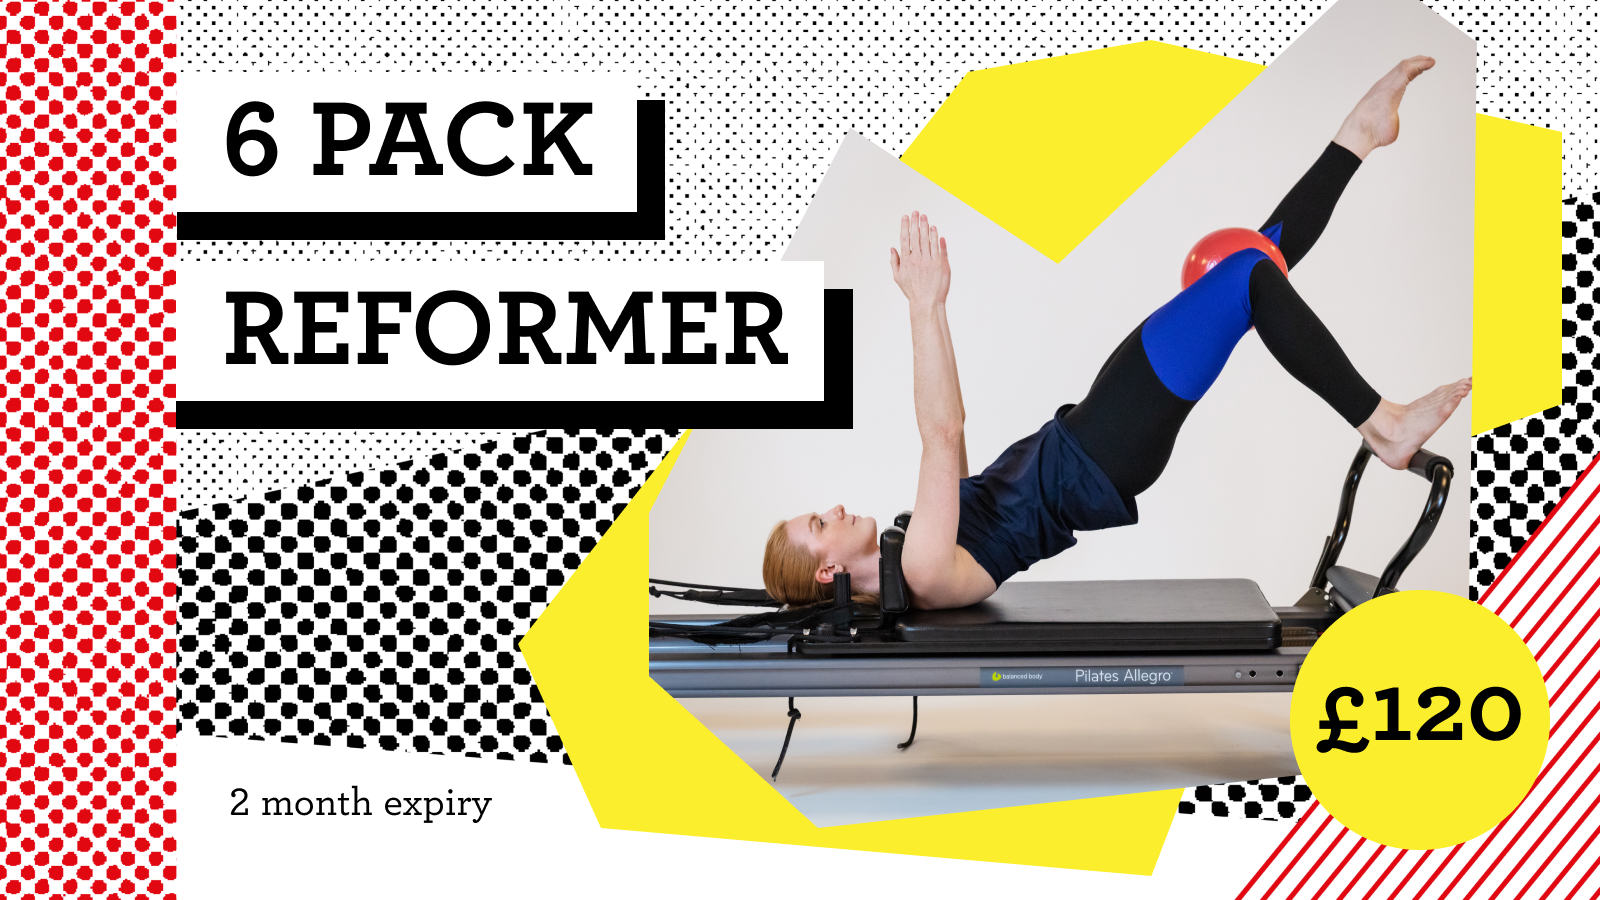 Reformer Pilates Class Packages - Move your Frame